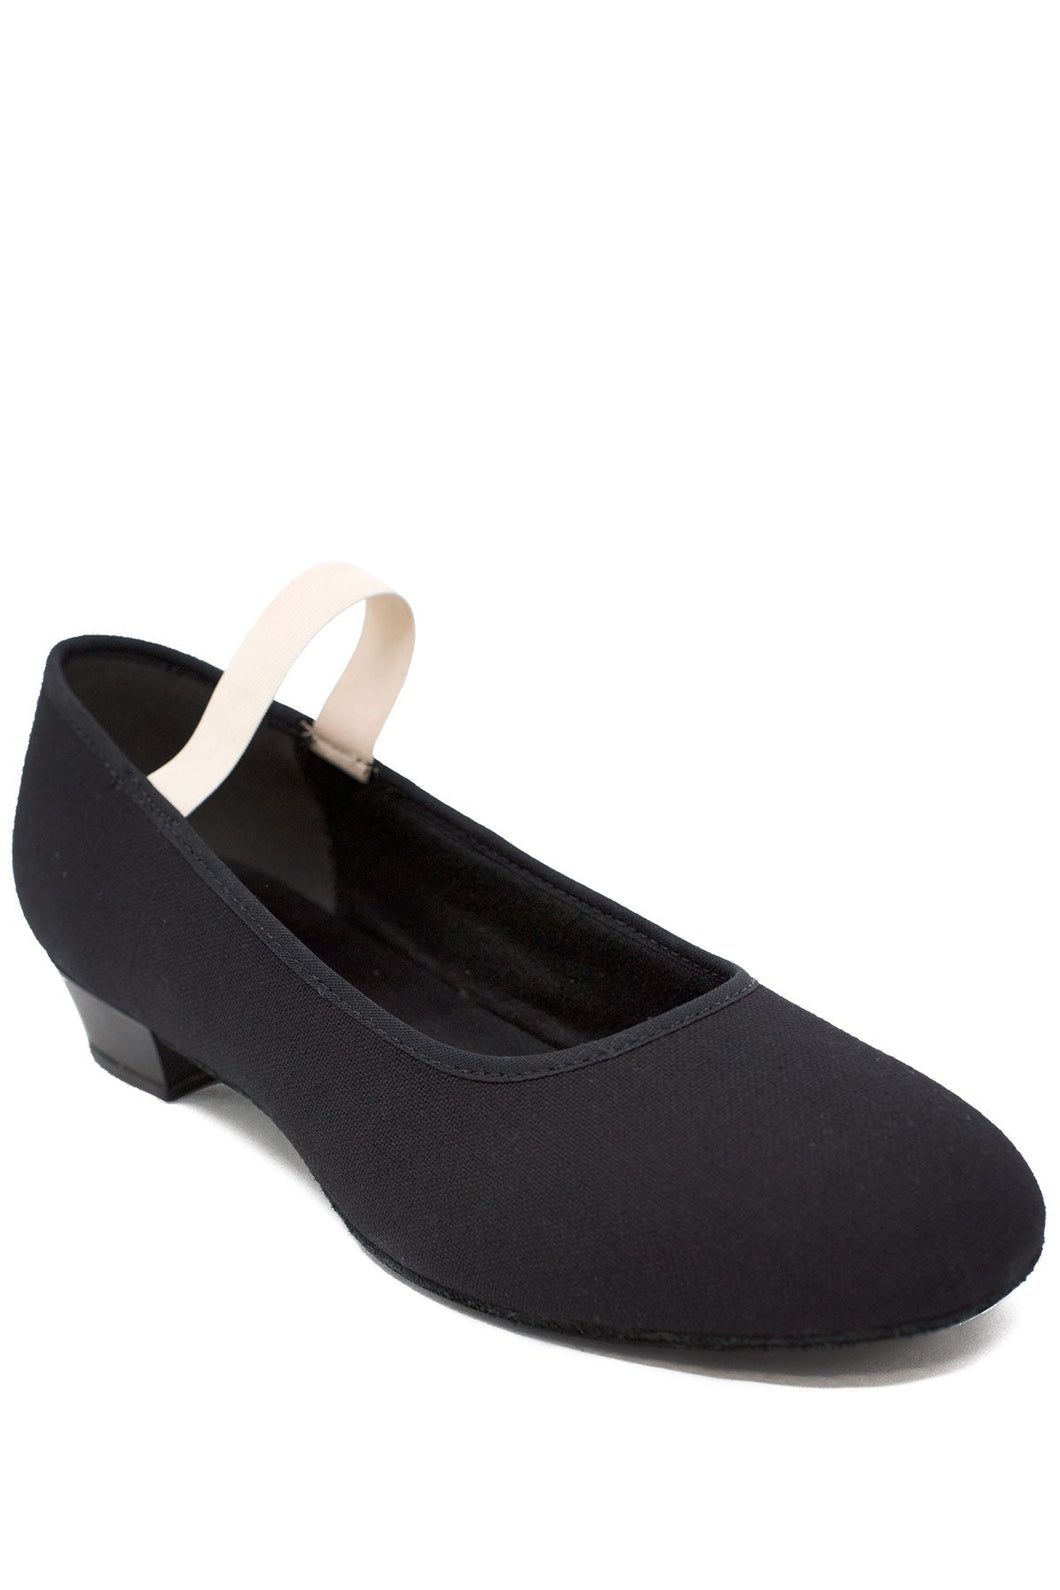 Melody -Pre Arched Royal Children Shoes - RO12S